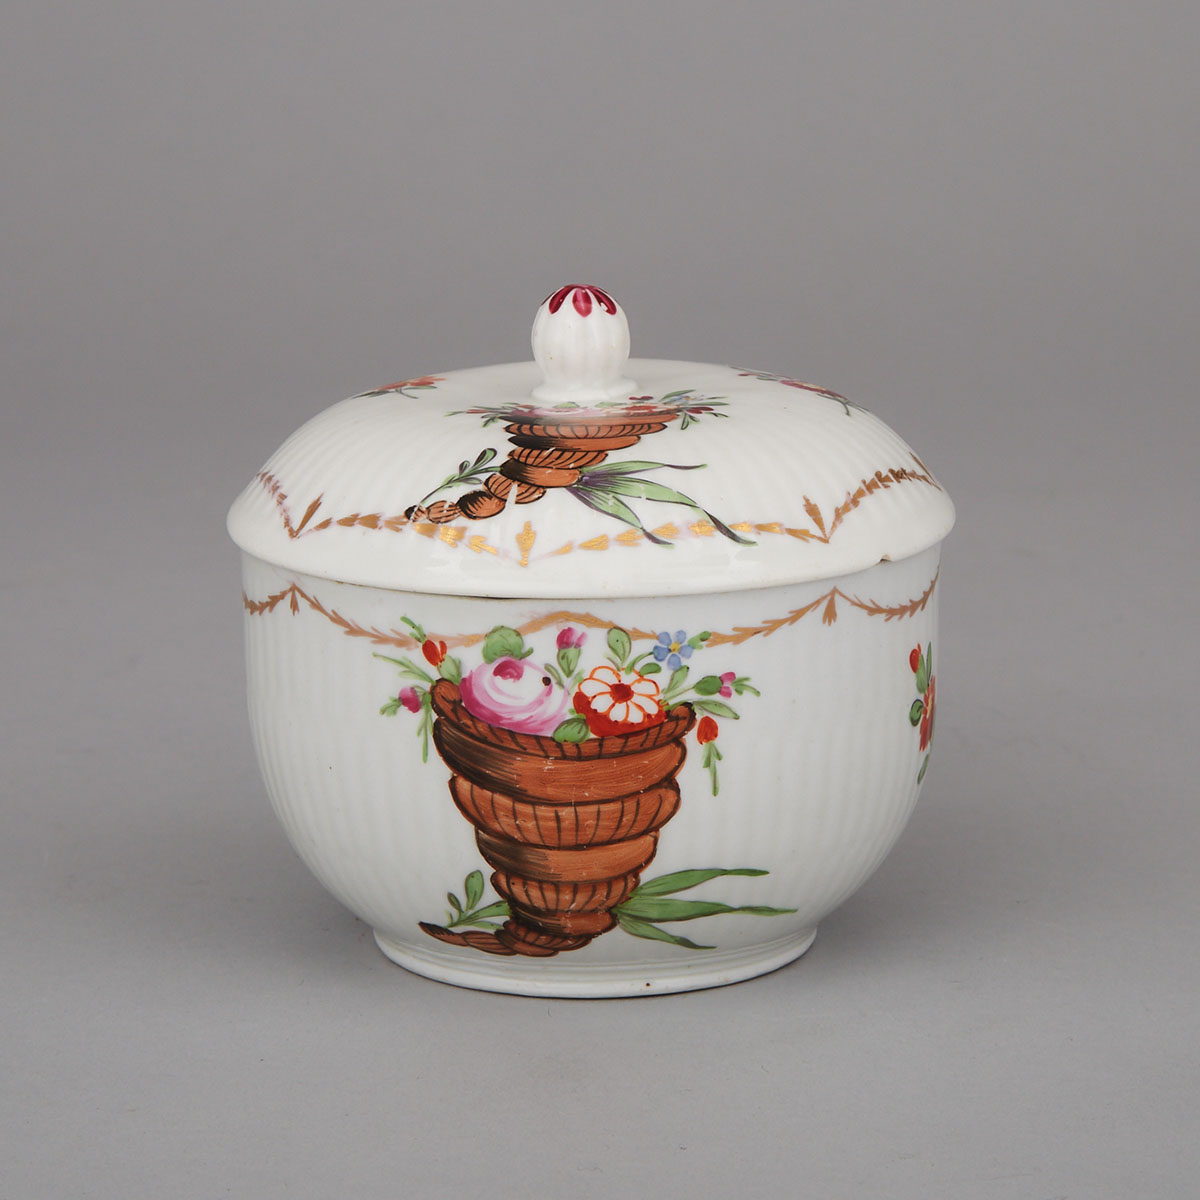 Wallendorf Covered Sugar Bowl, late 18th century